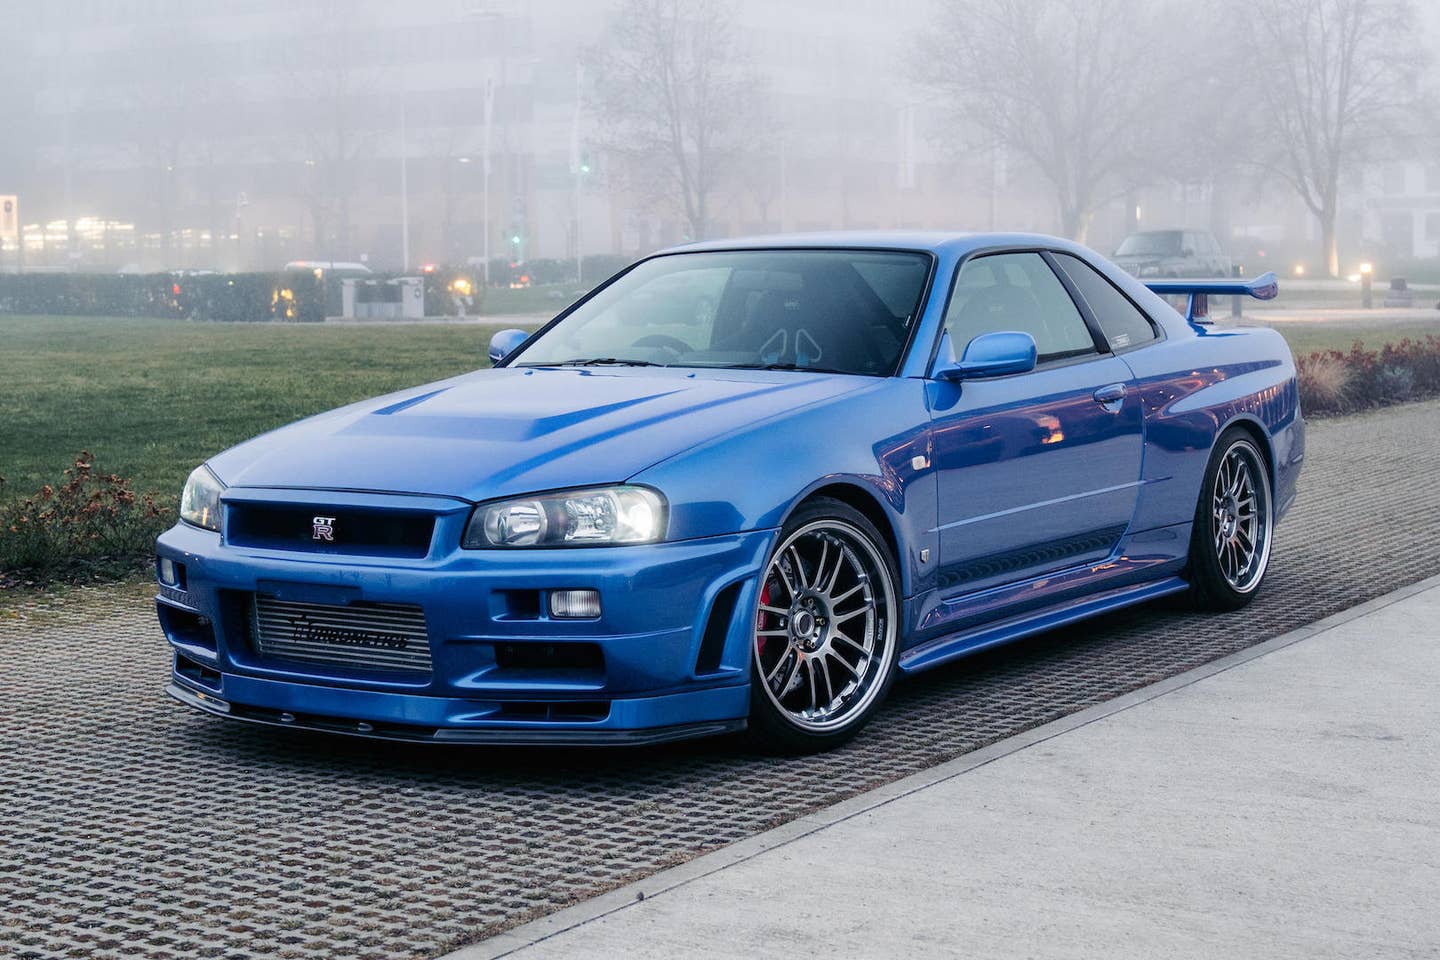 $1.18 million R34 GT-R, the most expensive Nissan ever sold